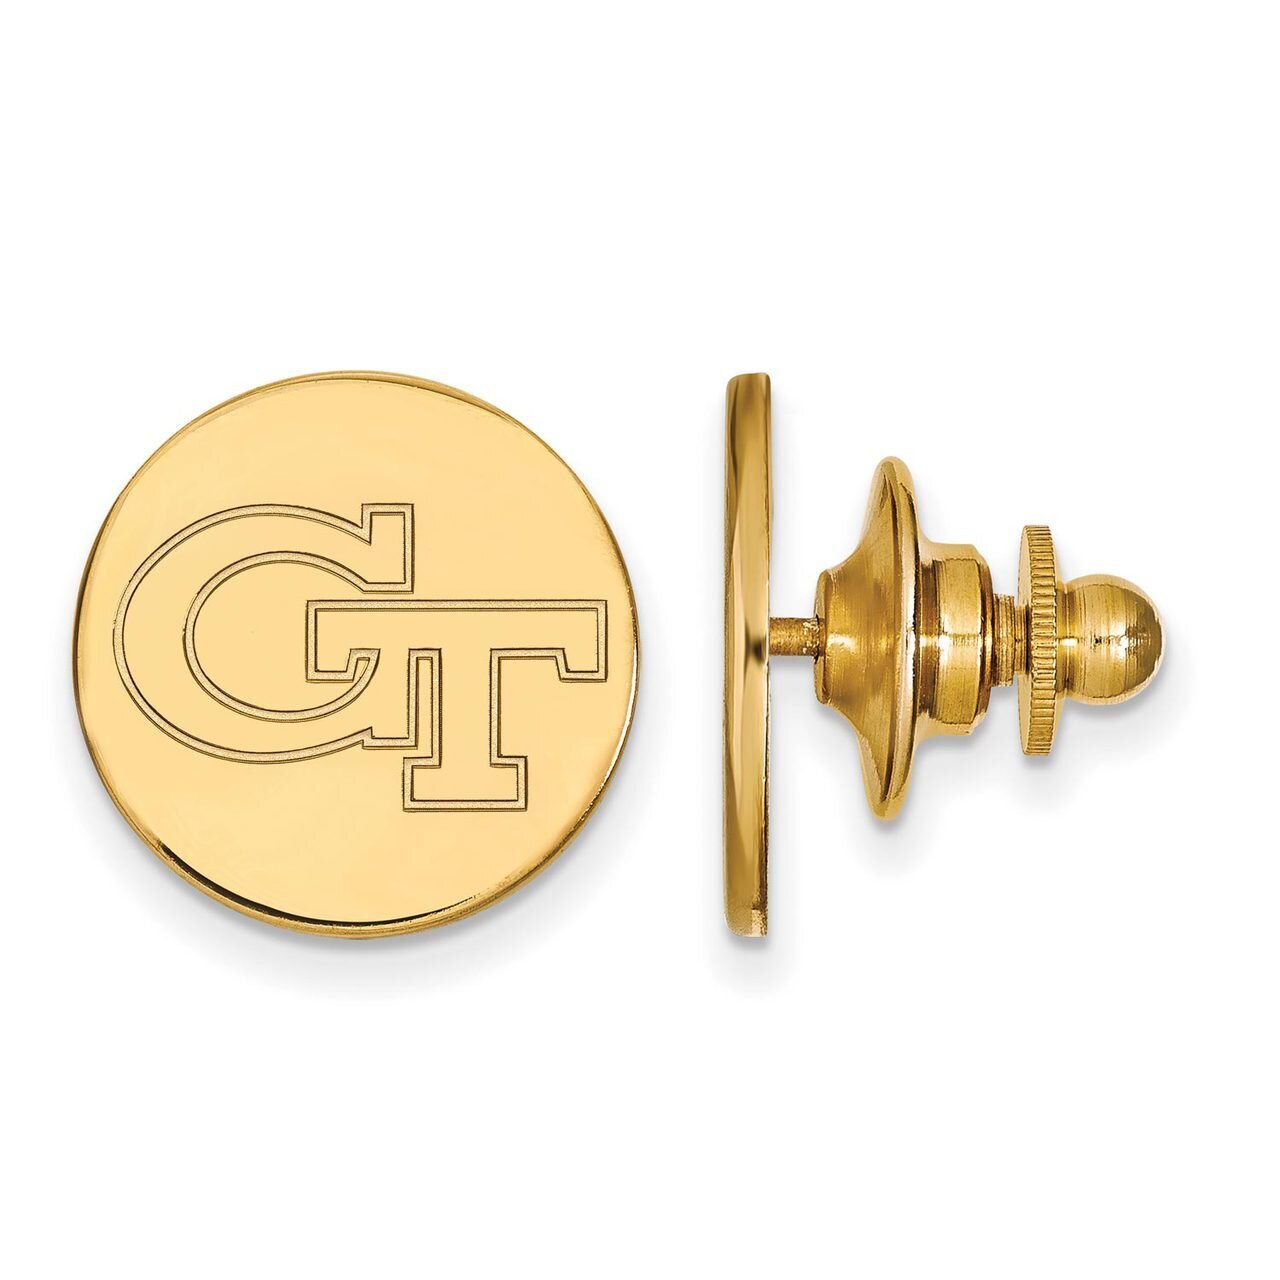 Georgia Institute of Technology Lapel Pin 14k Yellow Gold 4Y062GT